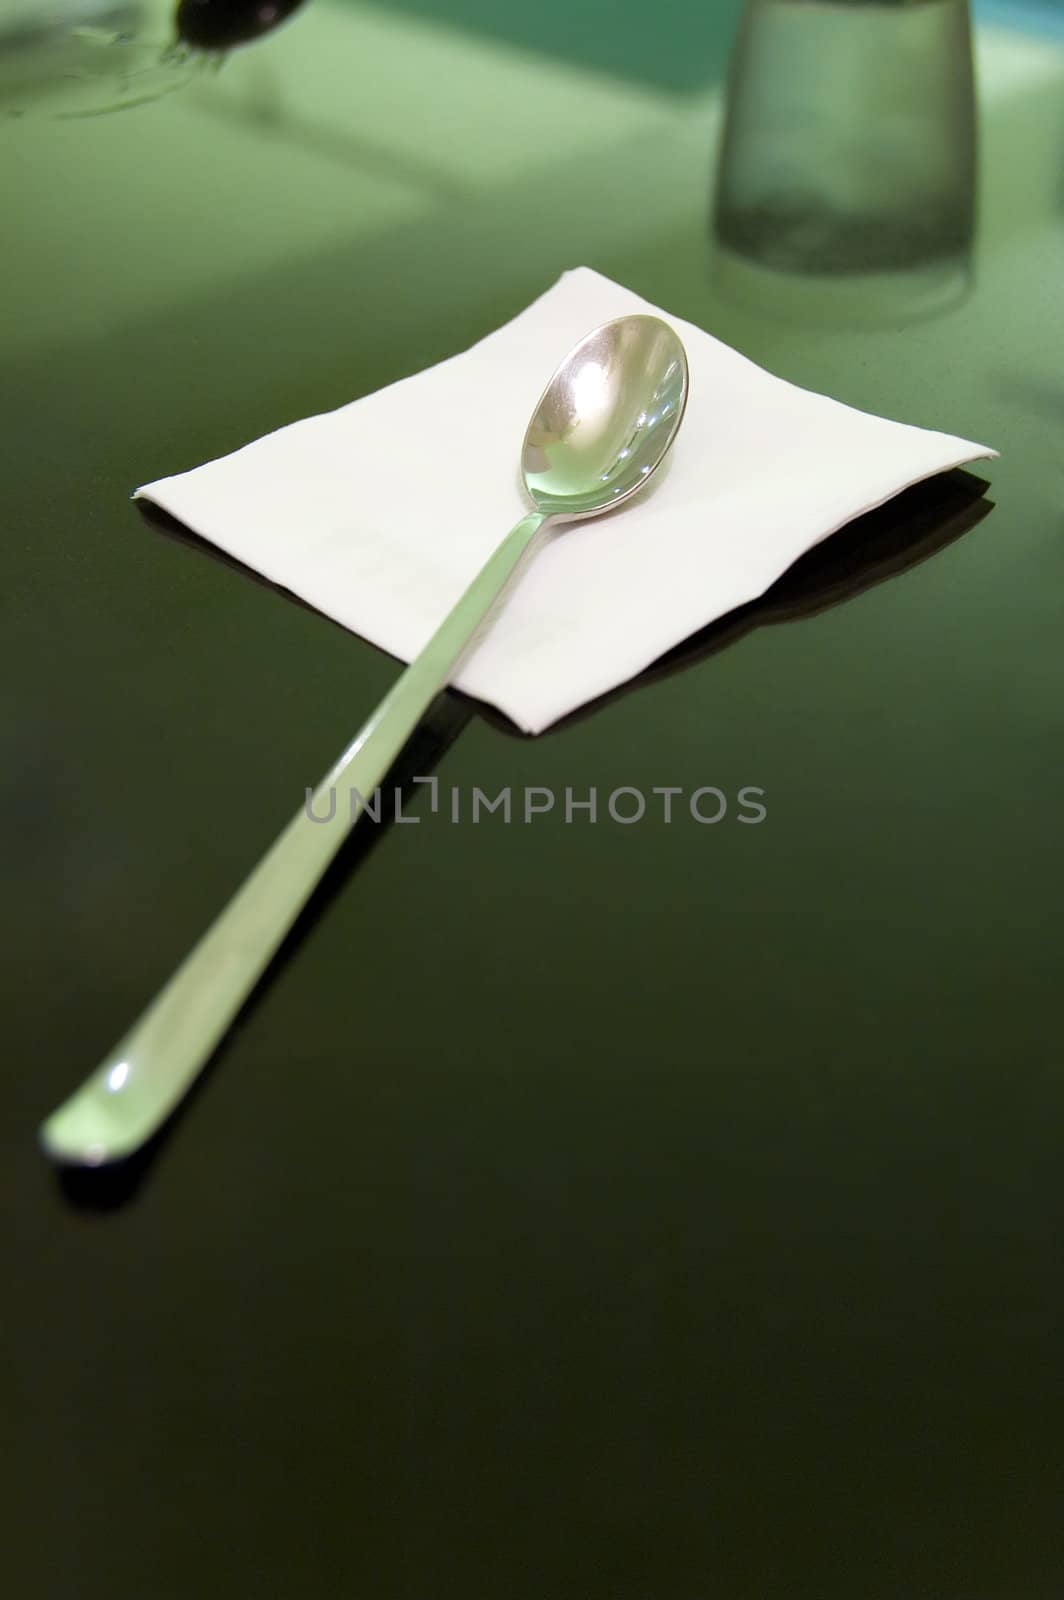 spoon on the table